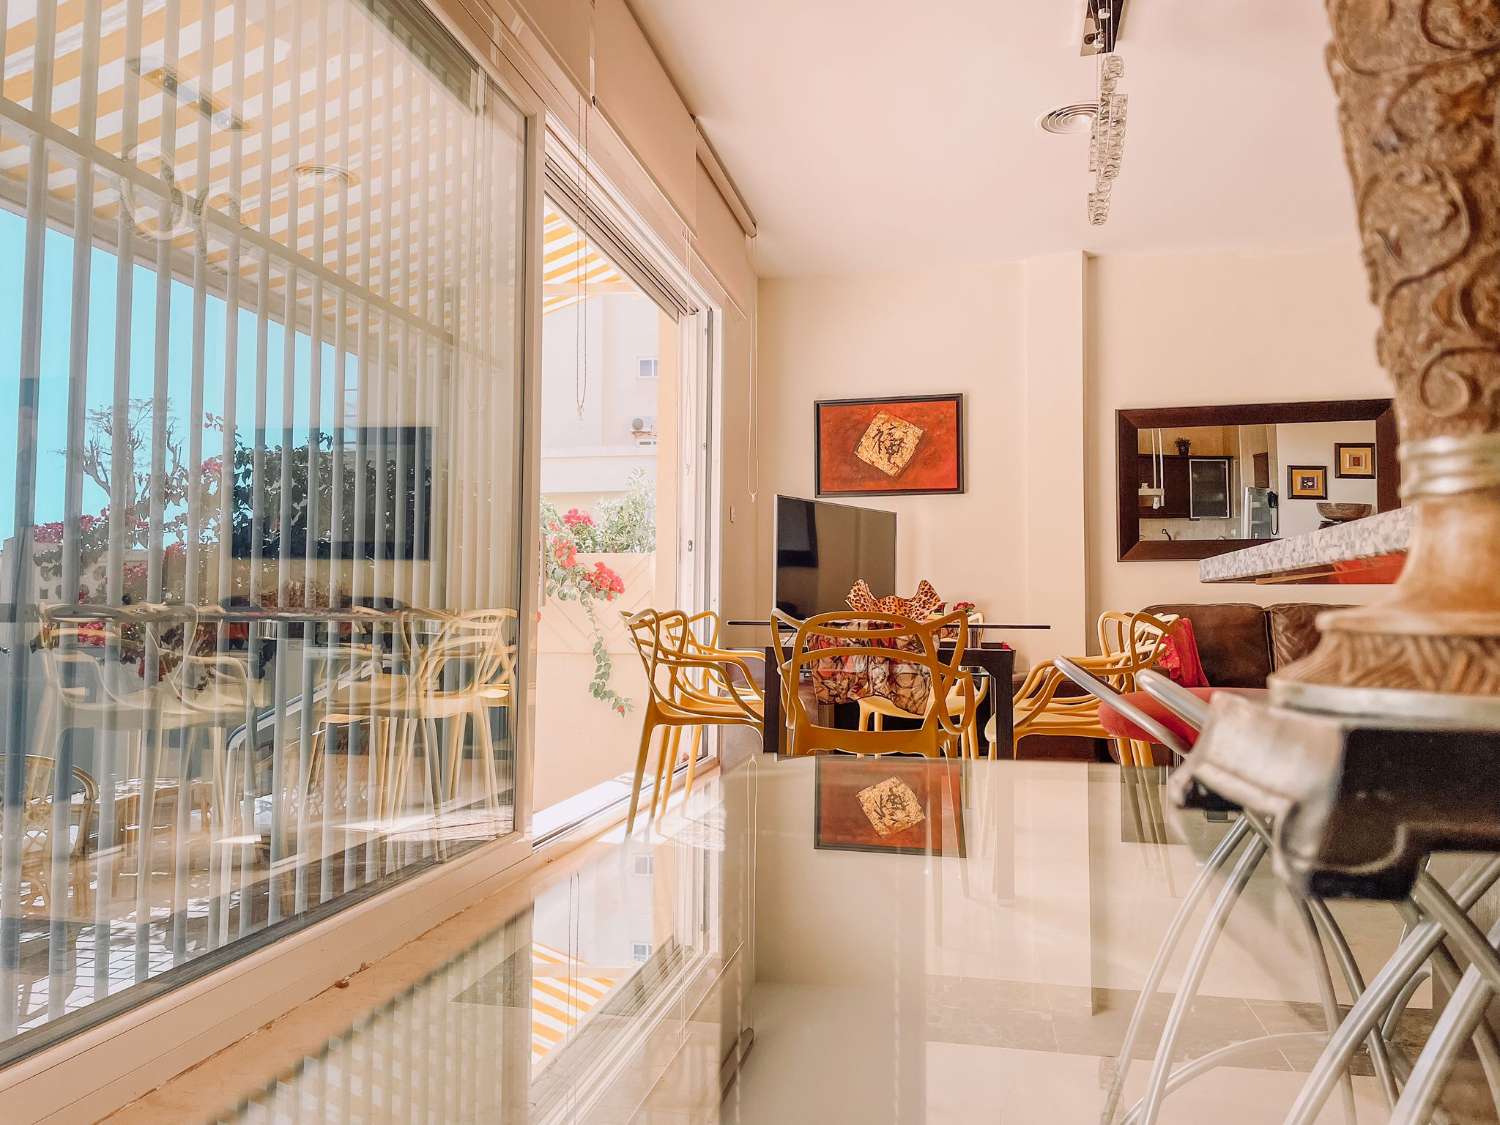 Fantastic apartment with 3 bedrooms in the heart of Carihuela with large terrace area and on the beachfront